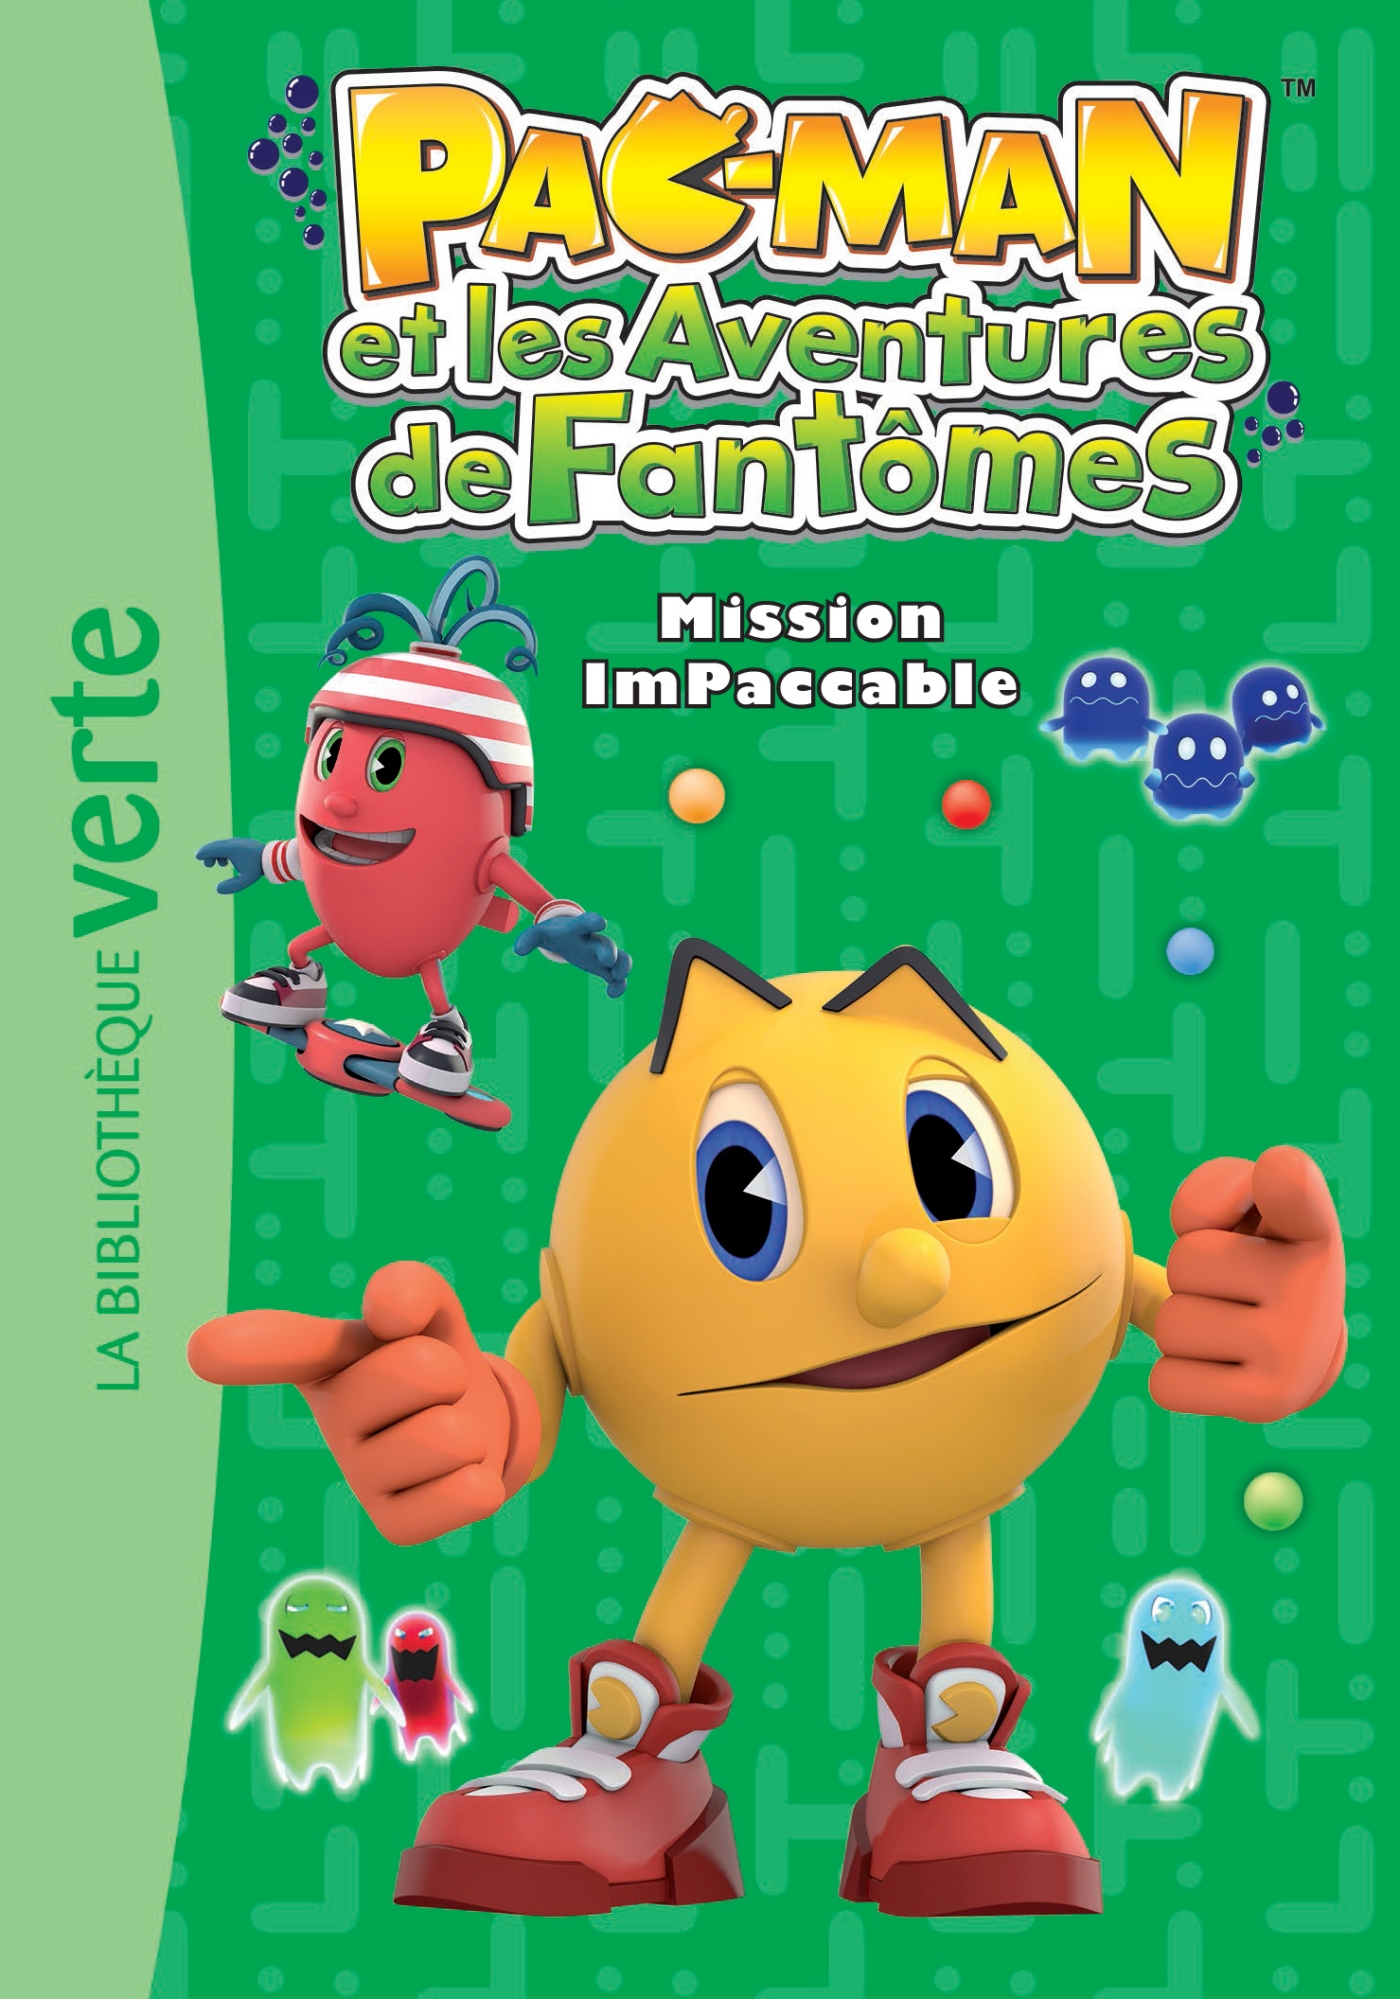 Pac-Man 04 - Mission ImPaccable